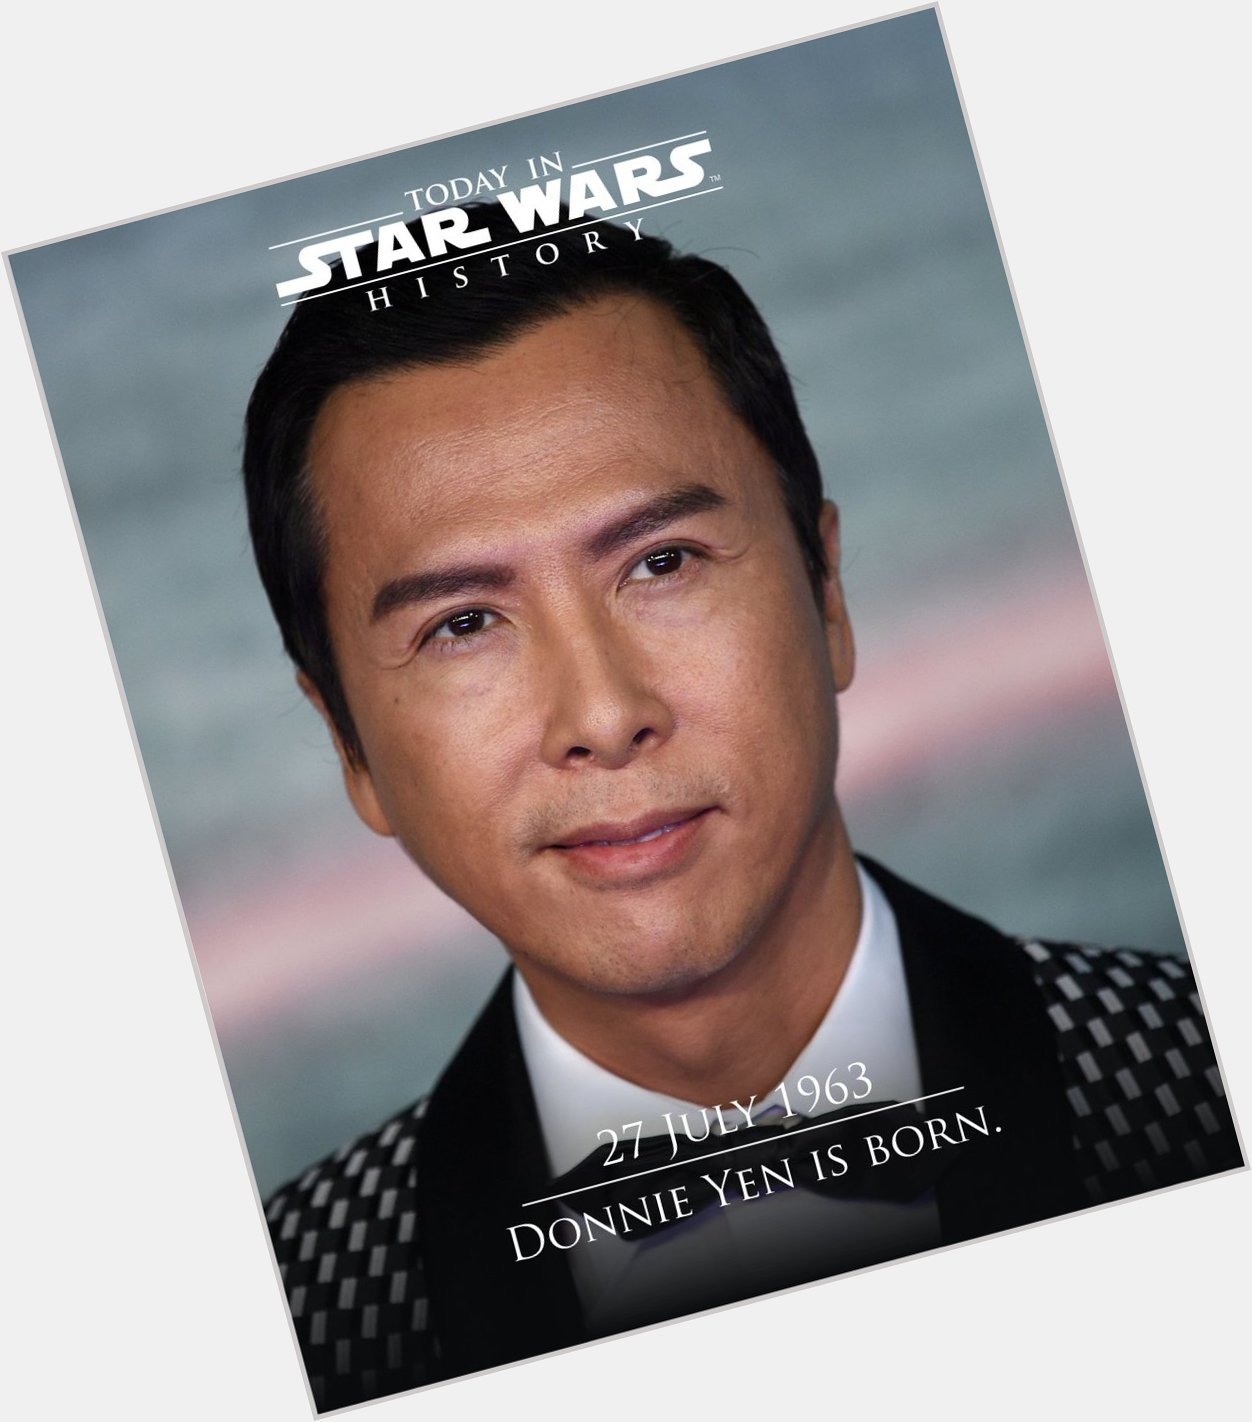 Happy Birthday, Donnie Yen! May the Force of others be with you.    